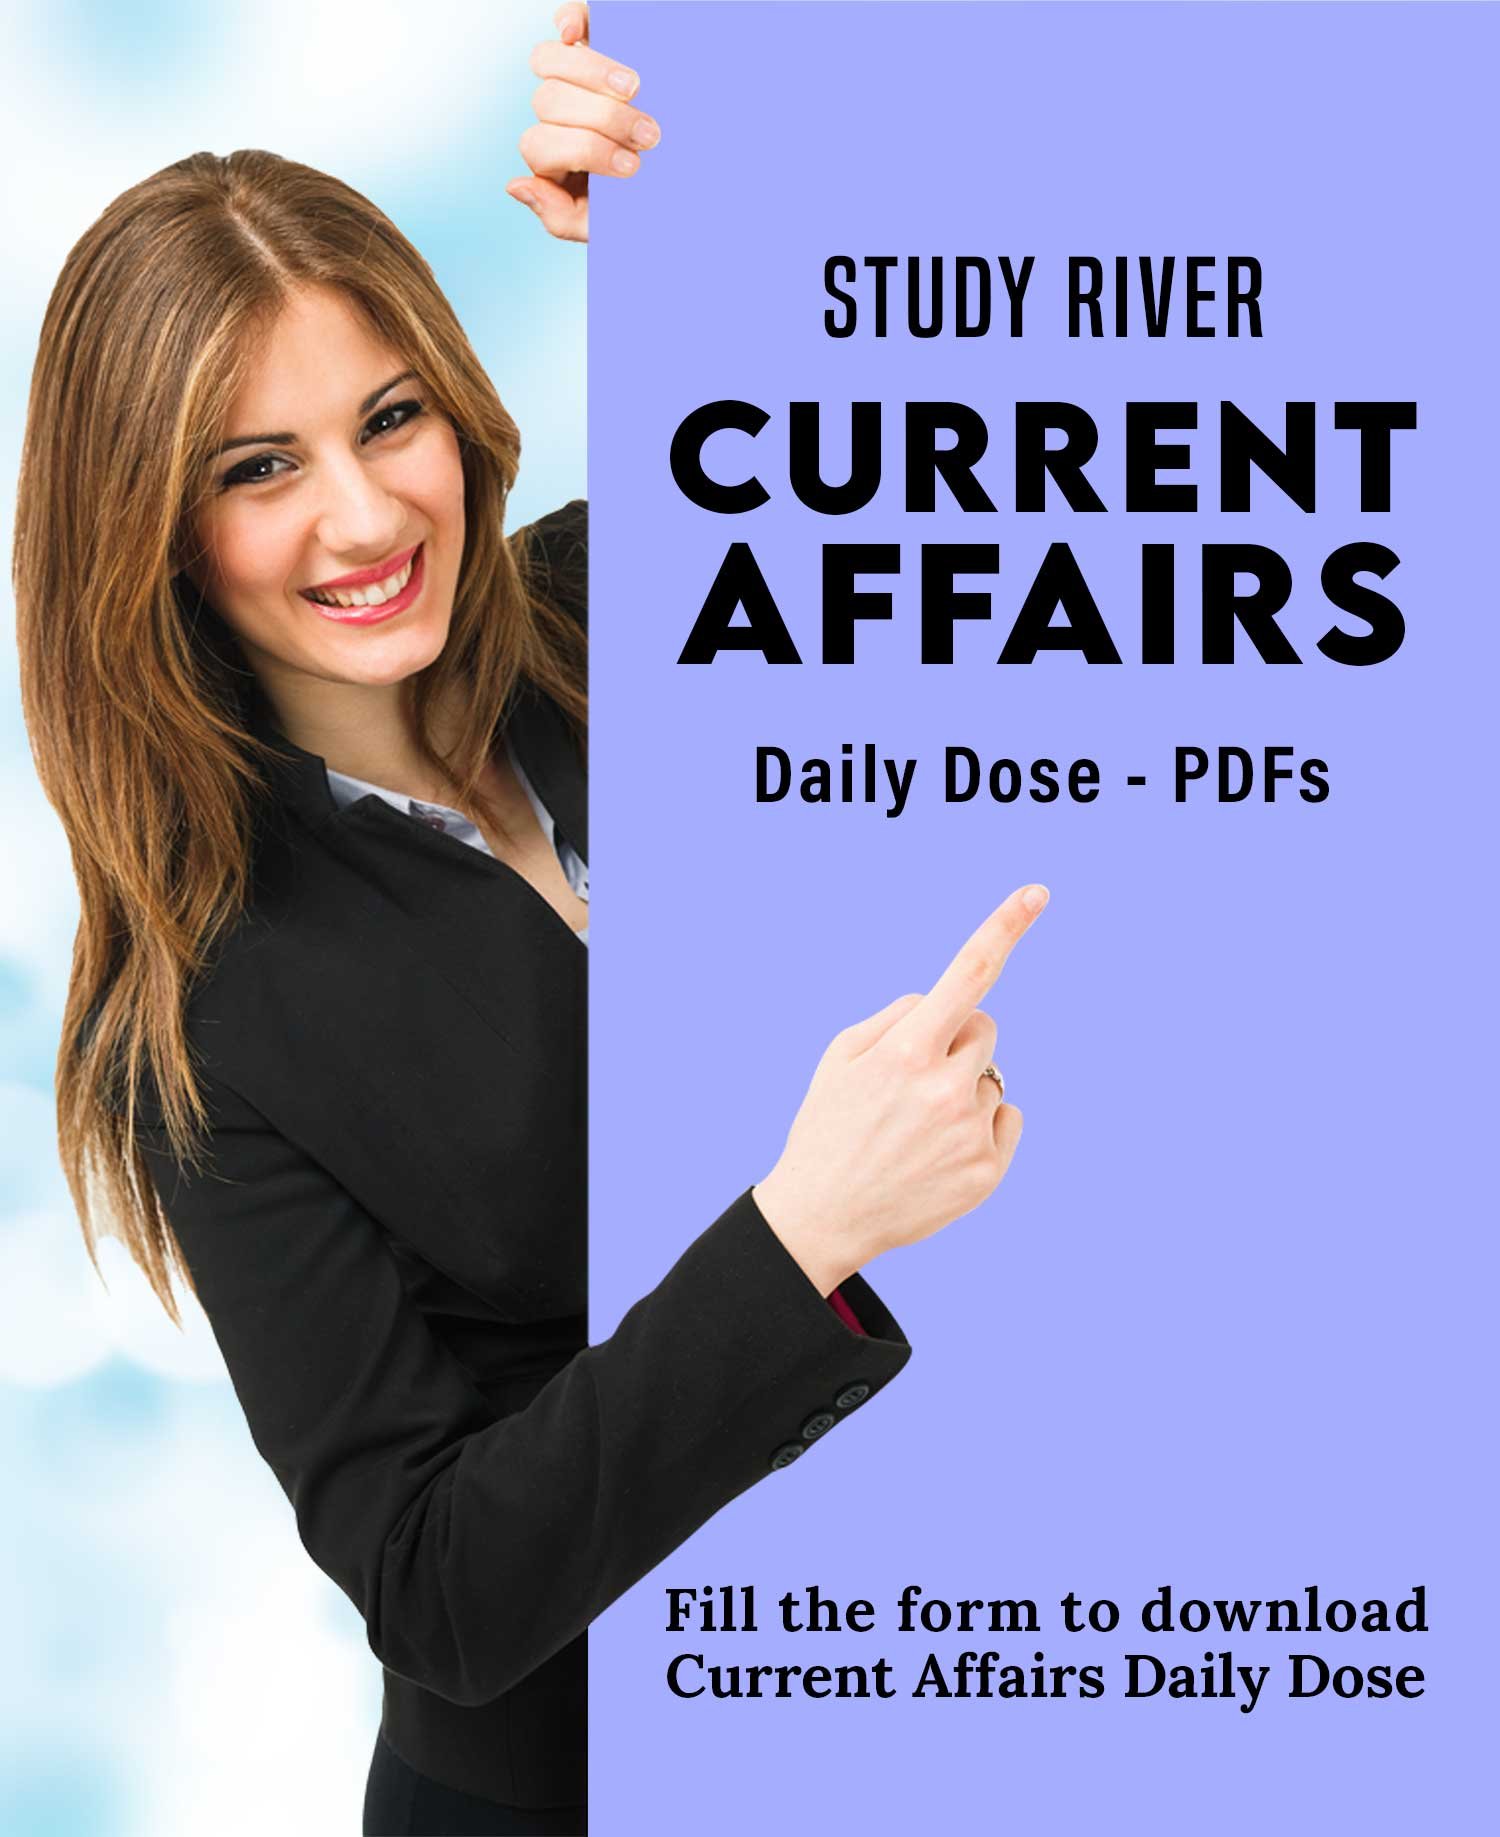 Study River Current Affairs Daily Dose